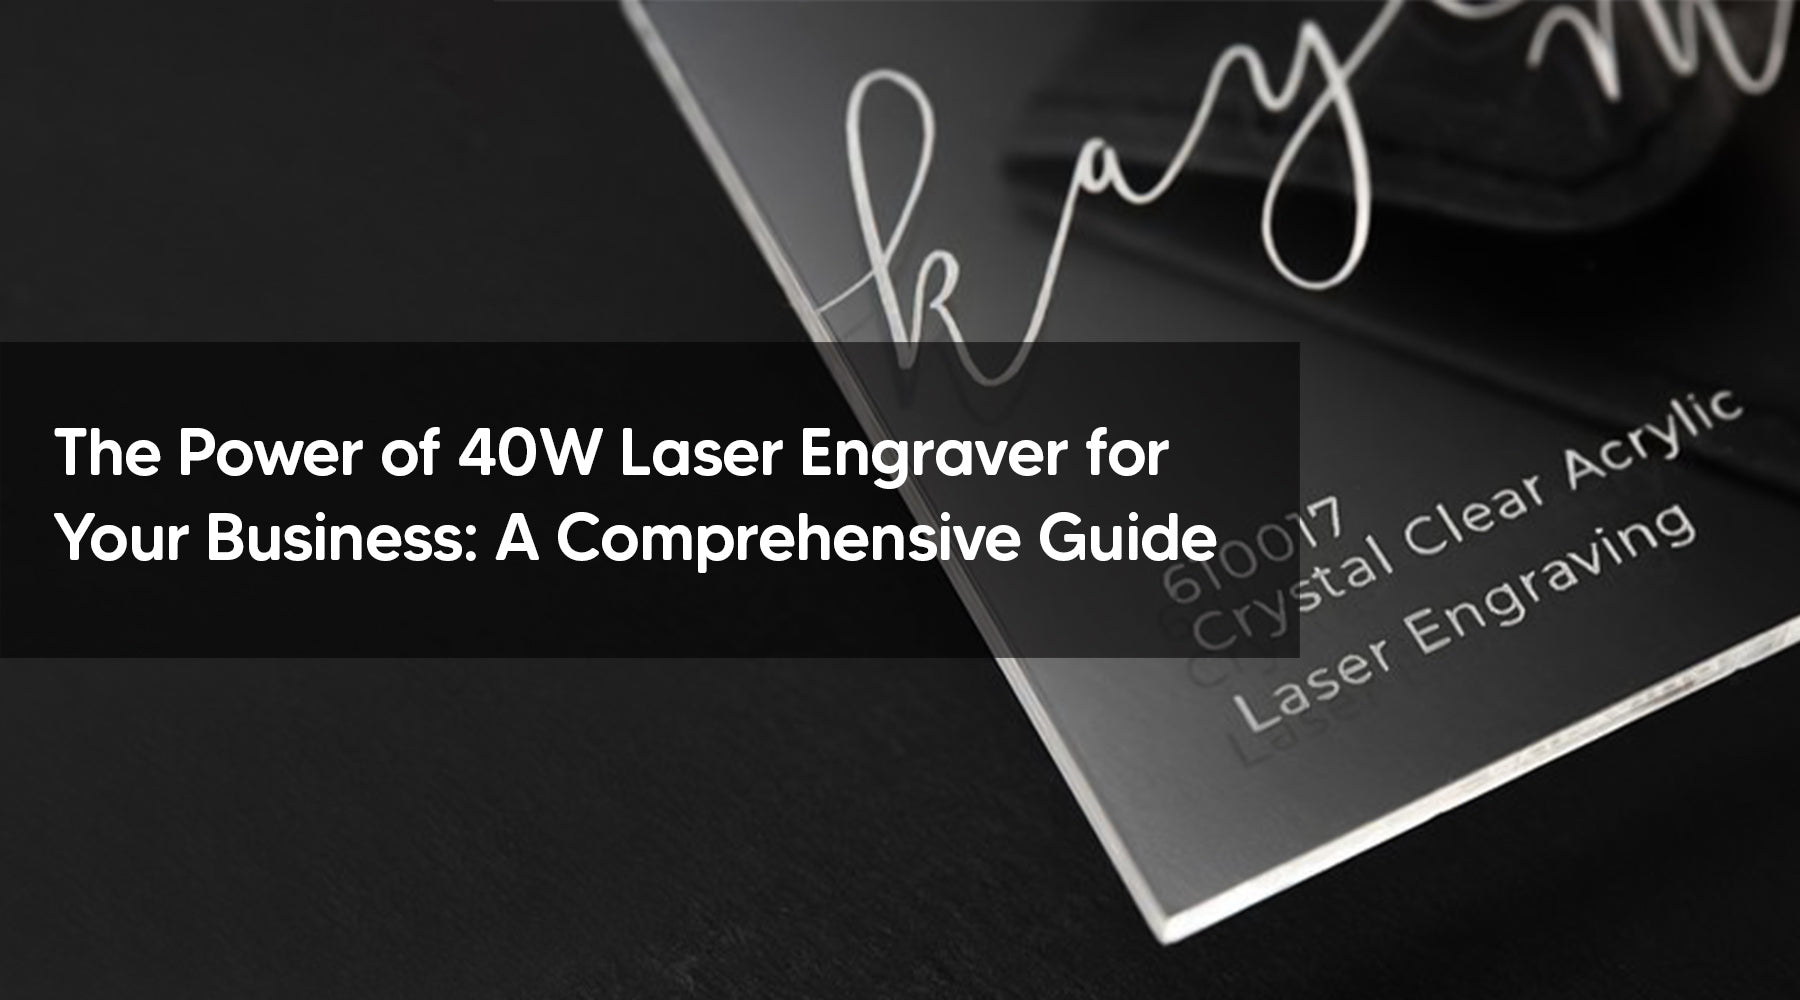 The Power of 40W Laser Engraver for Your Business: A Comprehensive Guide